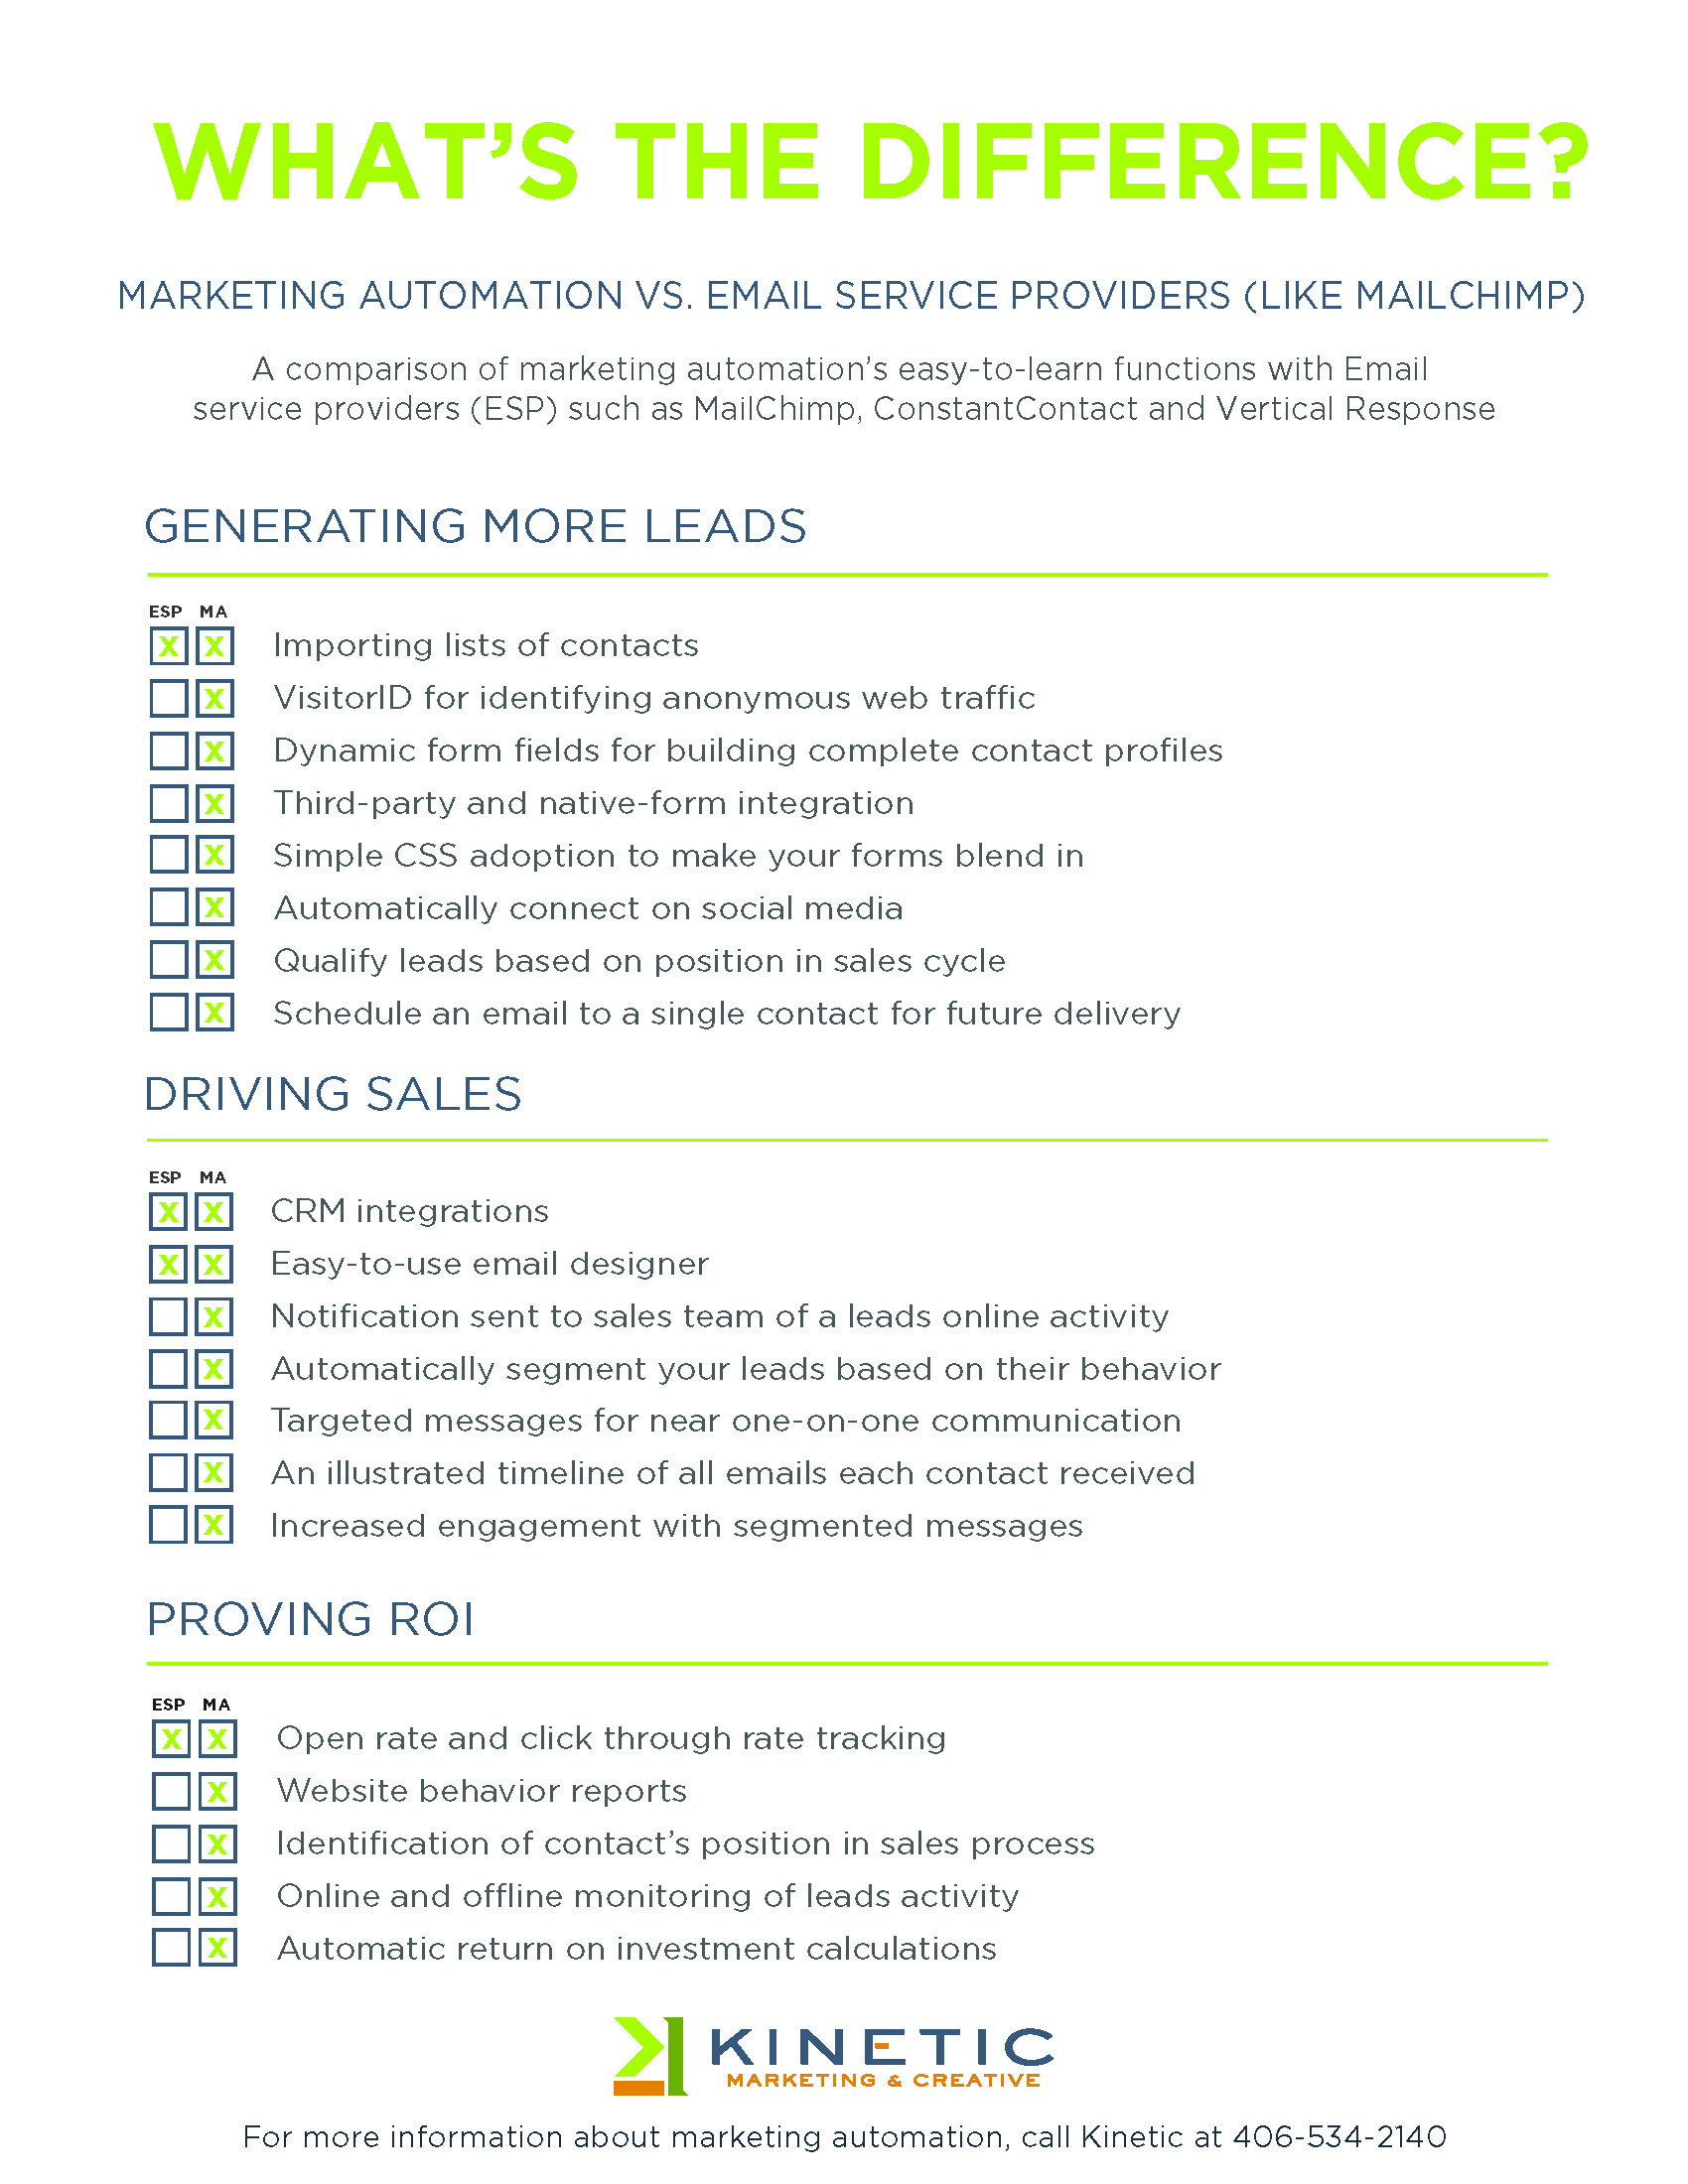 Visual representation of the key differences between Marketing Automation and Email Service Providers